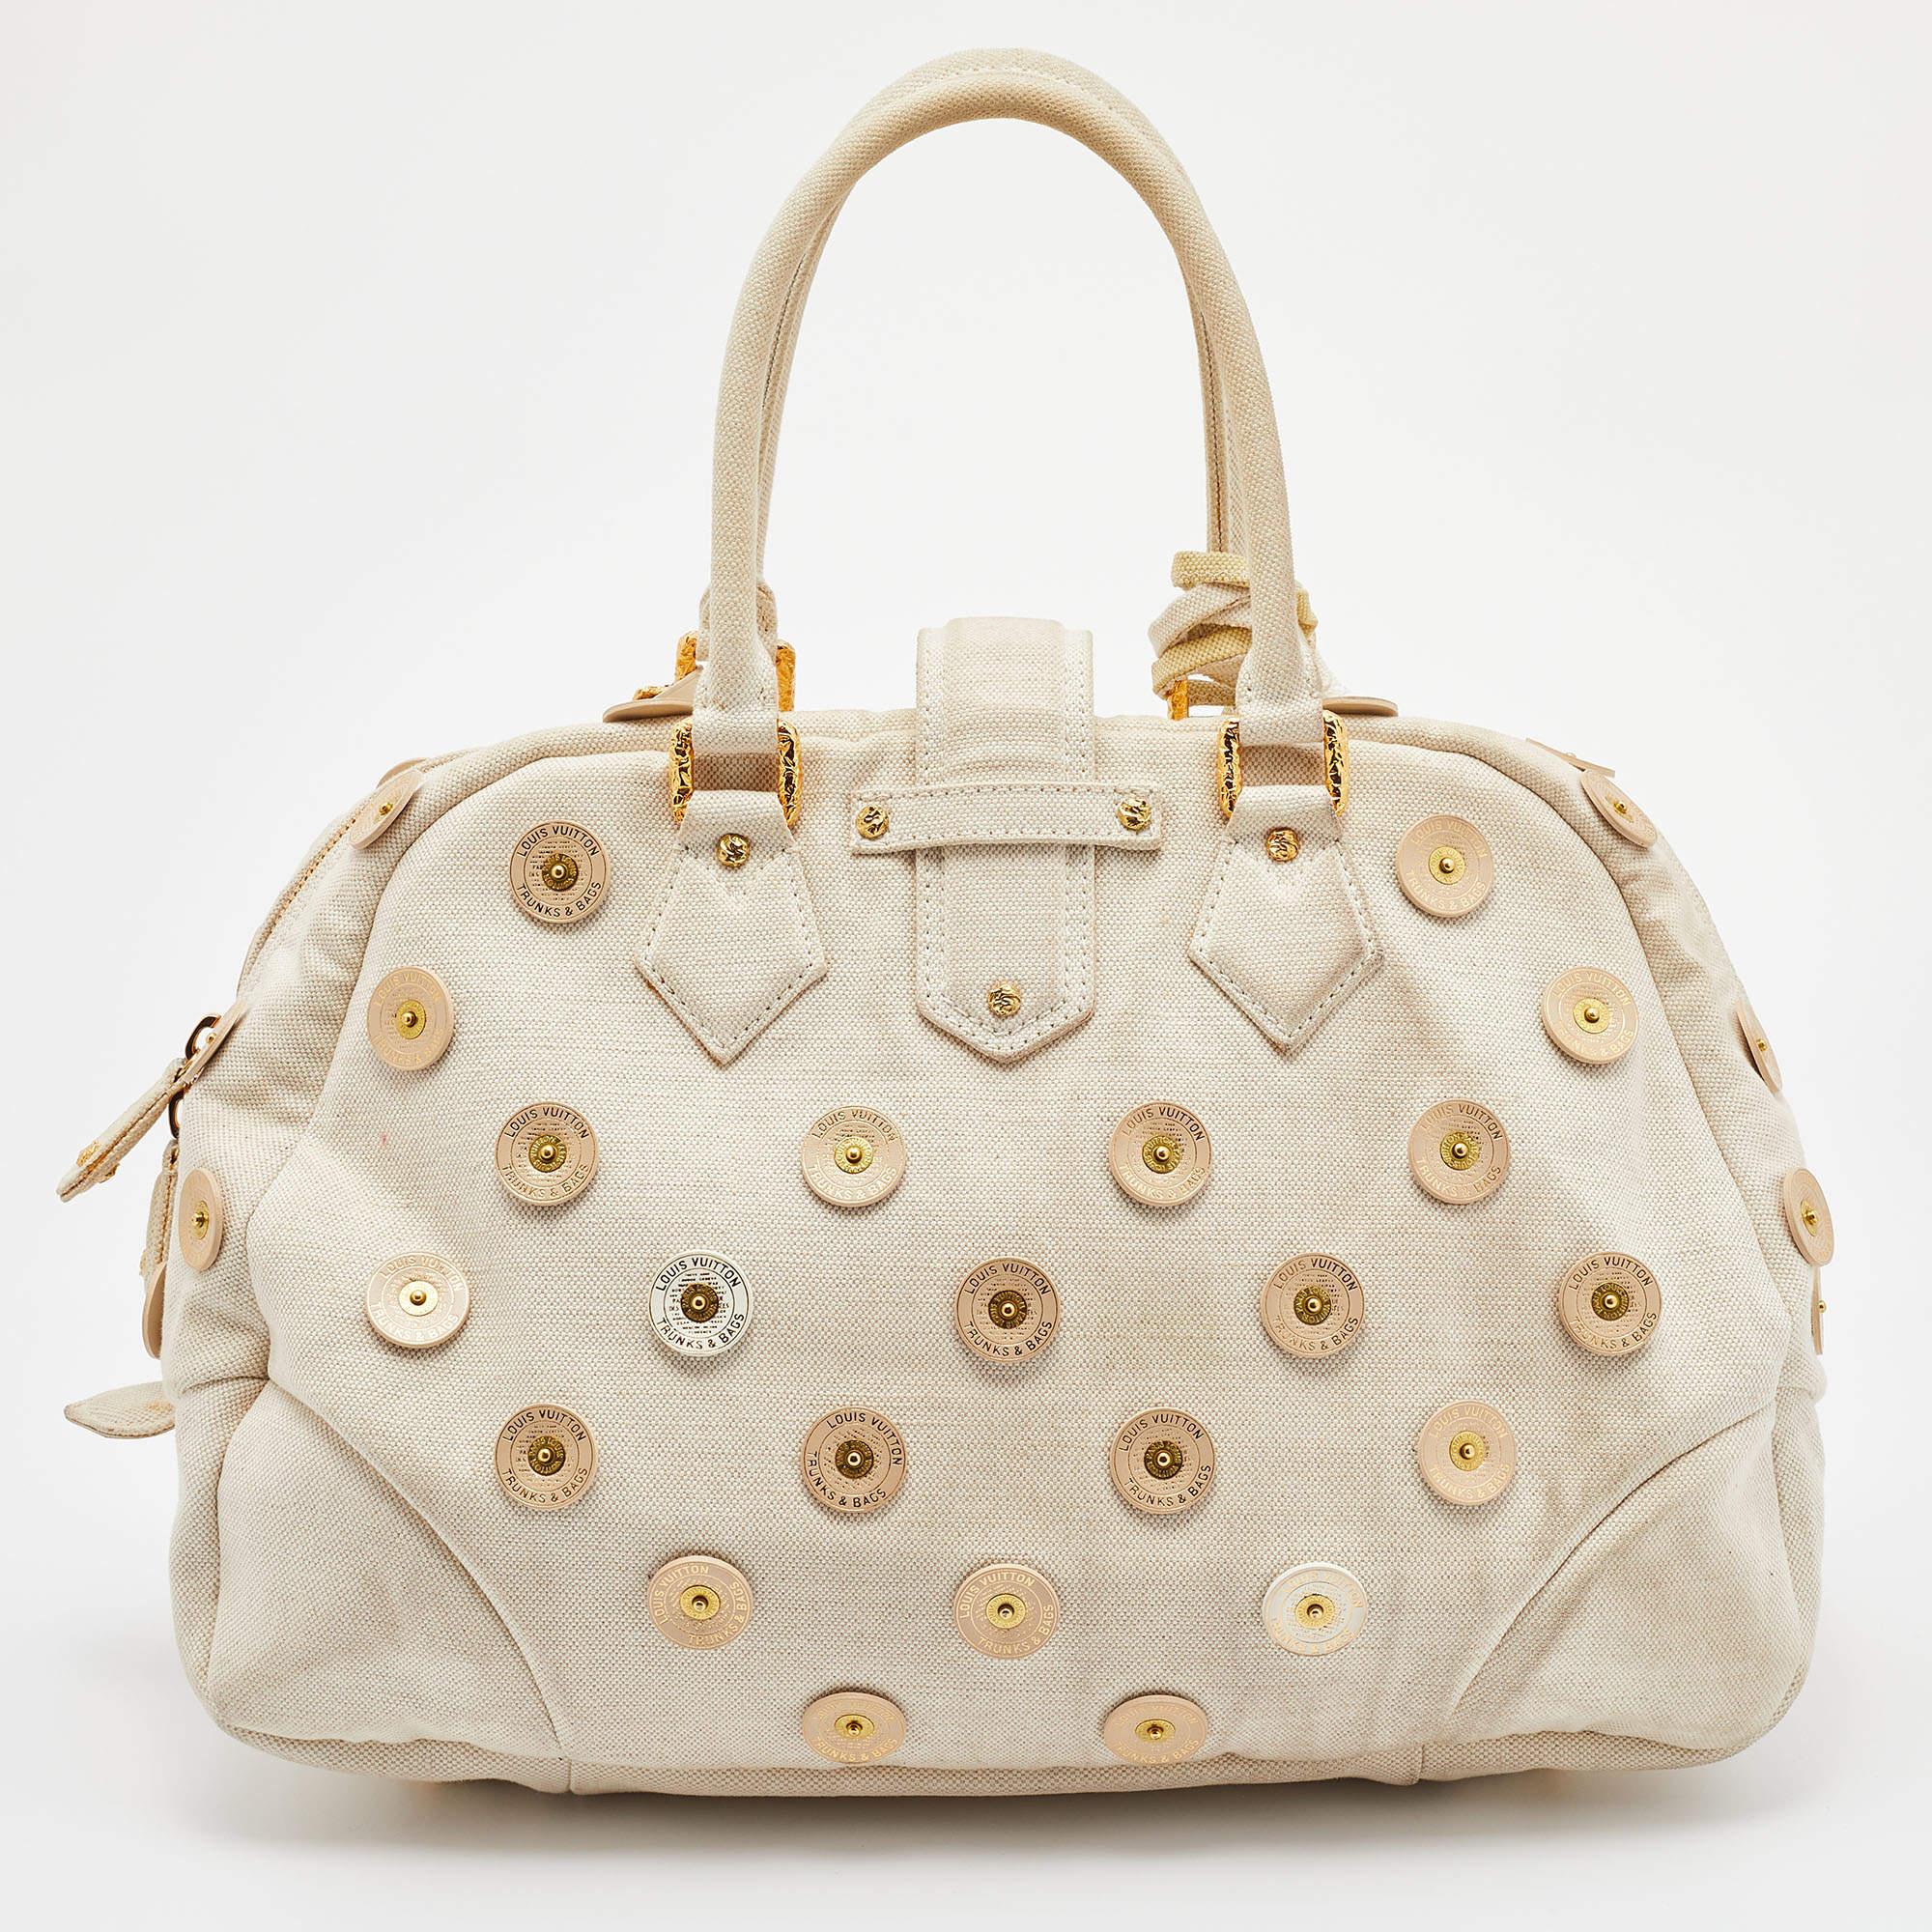 Louis Vuitton's handbags are popular owing to their high style and functionality. Crafted from canvas, this Bowly Panama bag has a beautiful polka dot design all over. The pretty bag features dual top handles, a tag, a textured lock on the front,